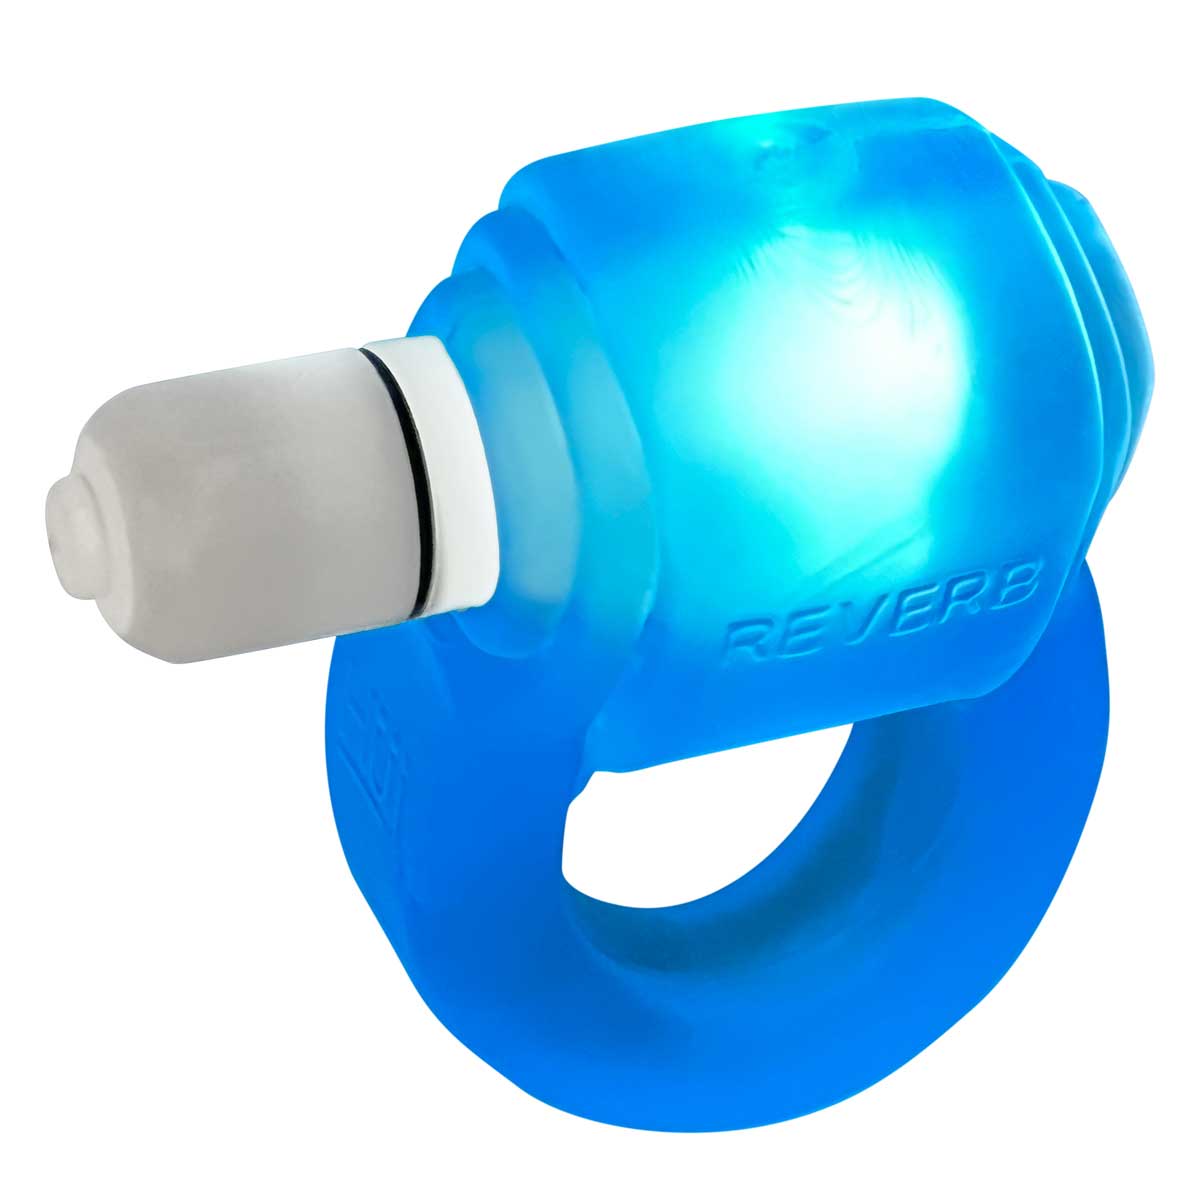 Glowdick Cockring With Led - Blue Ice-2